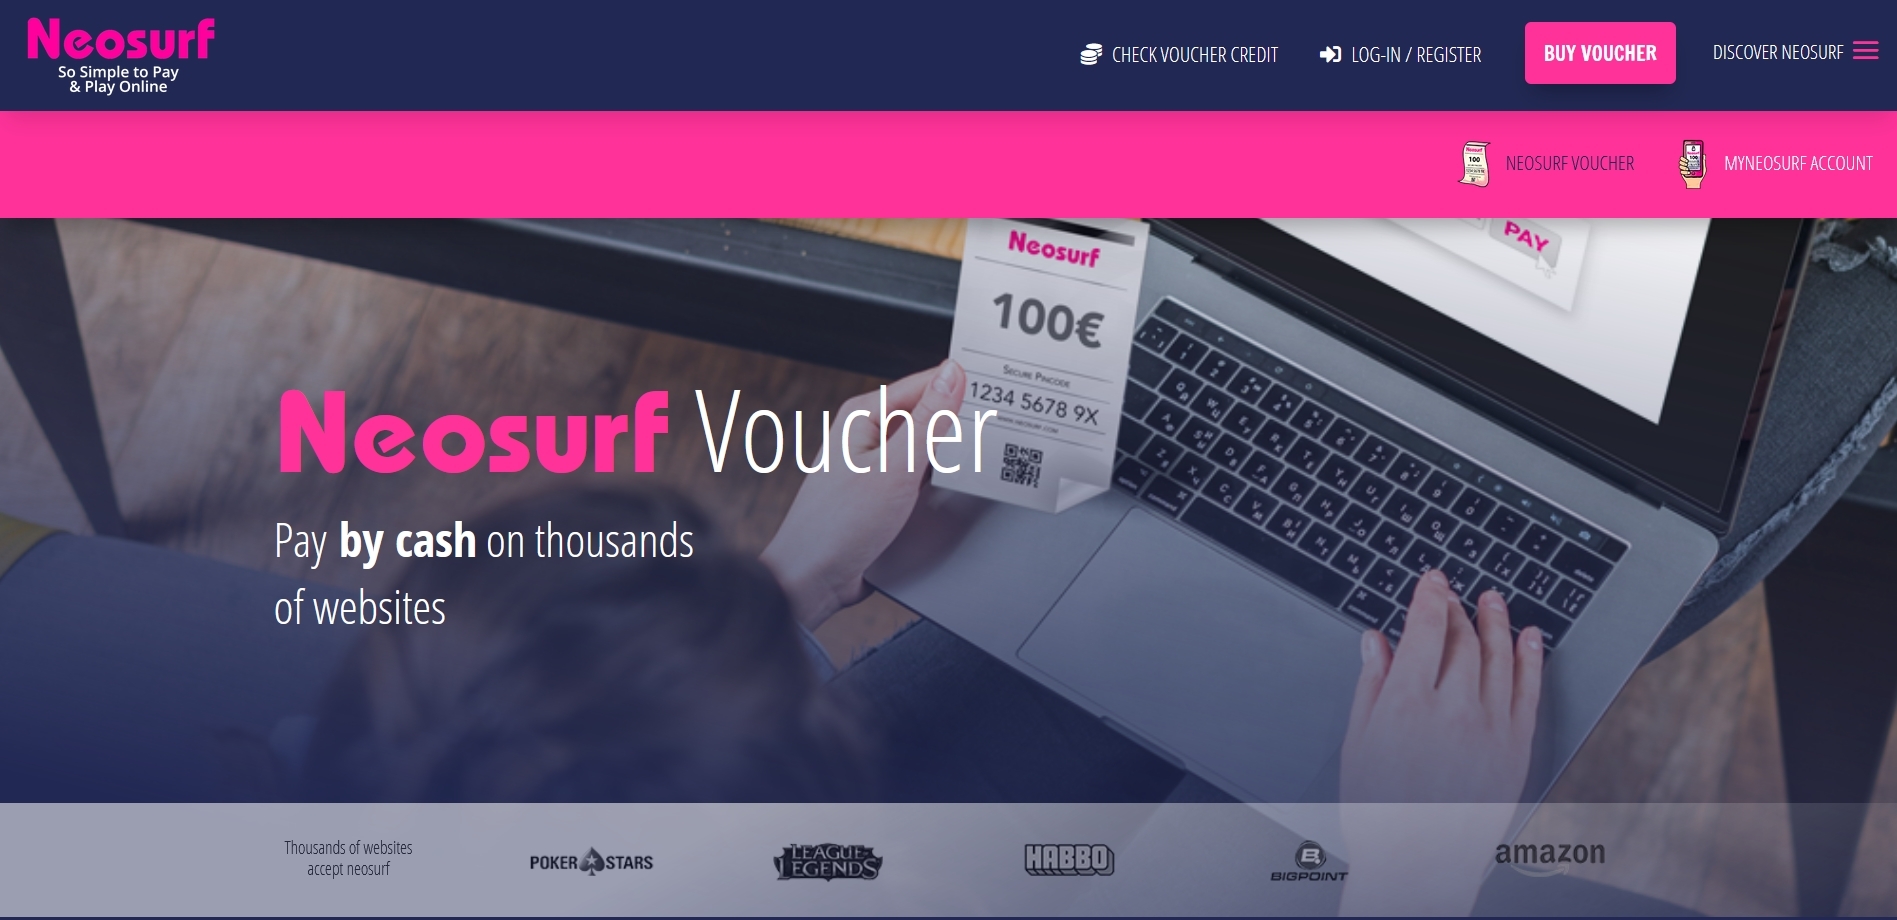 Neosurf €15 Gift Card BE